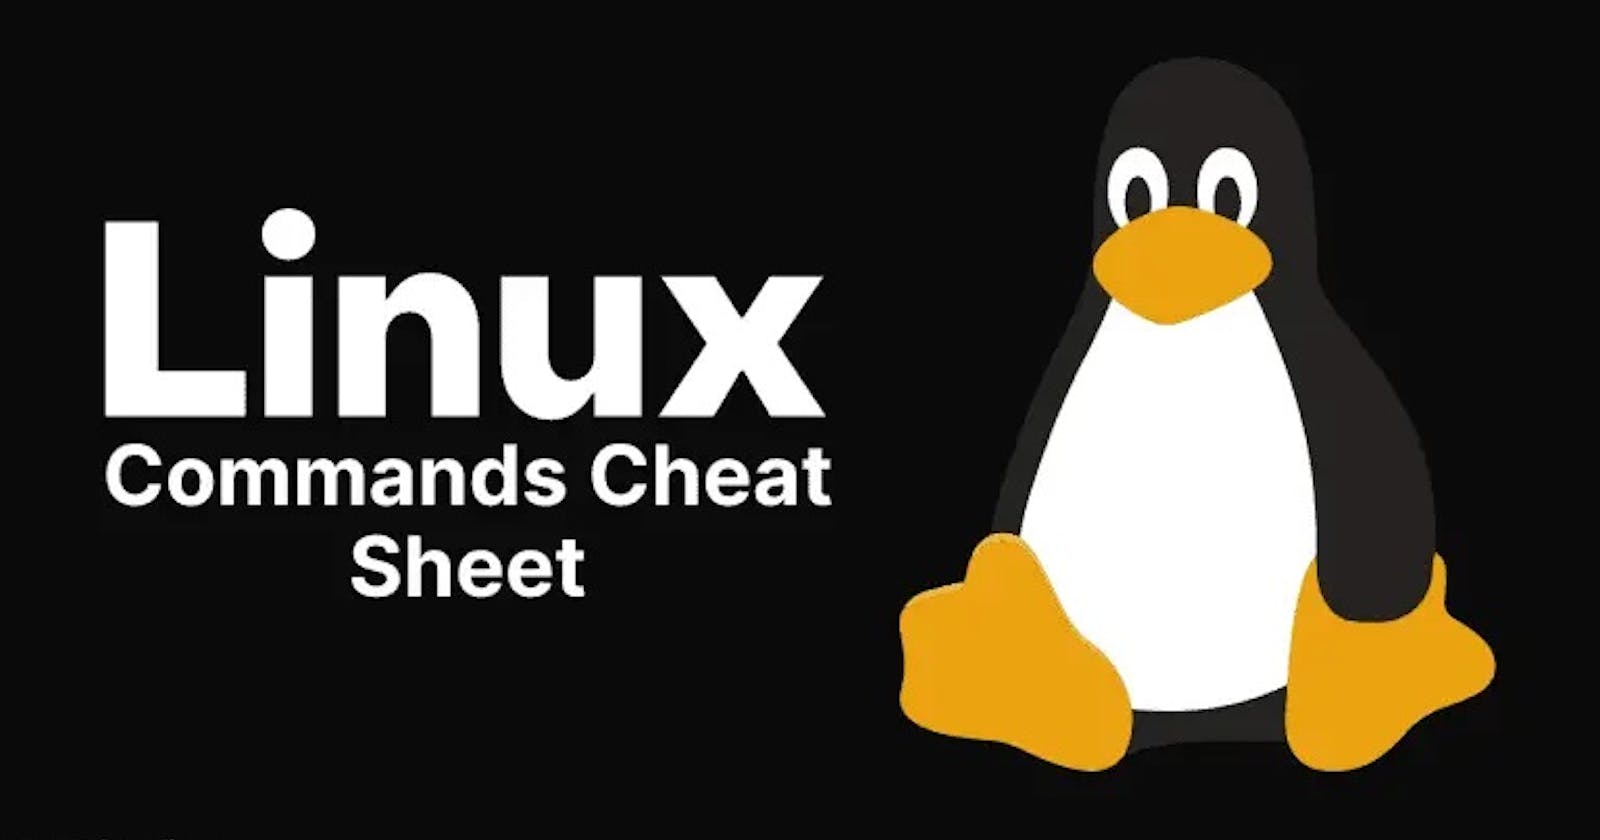 Master the Linux command line with this beginner-friendly guide! From file ops to networking, become a Linux pro in no time.